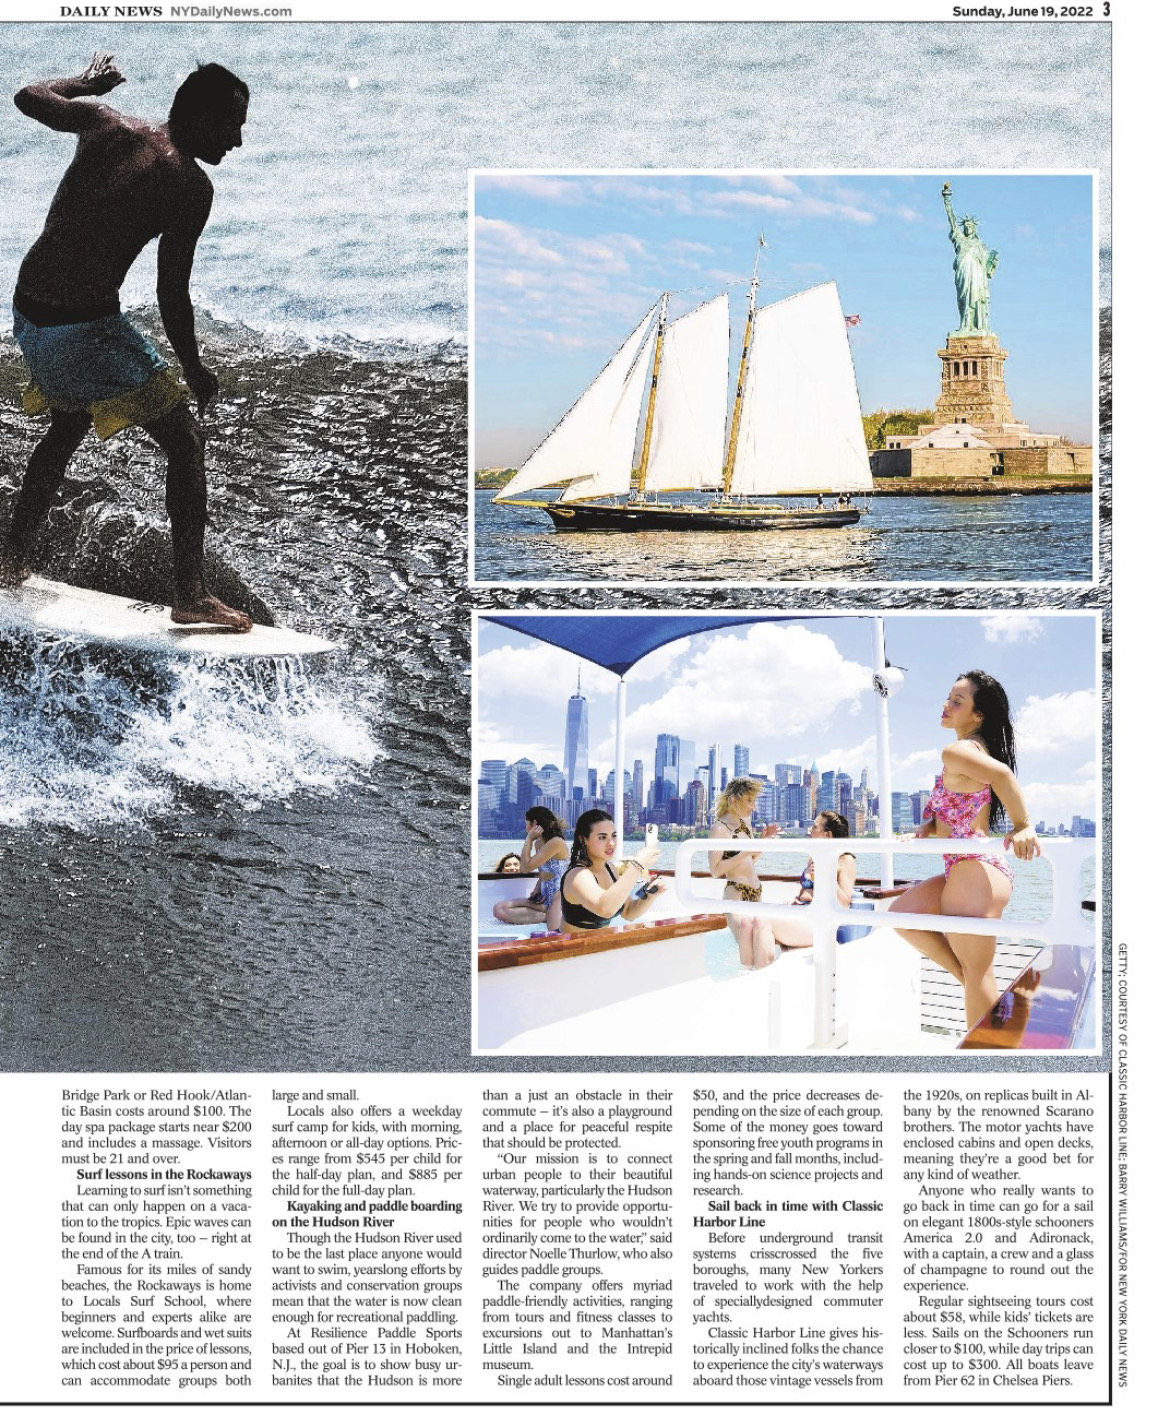 magazine of assortment of cruise photos, highlighting sightseeing and activities to do